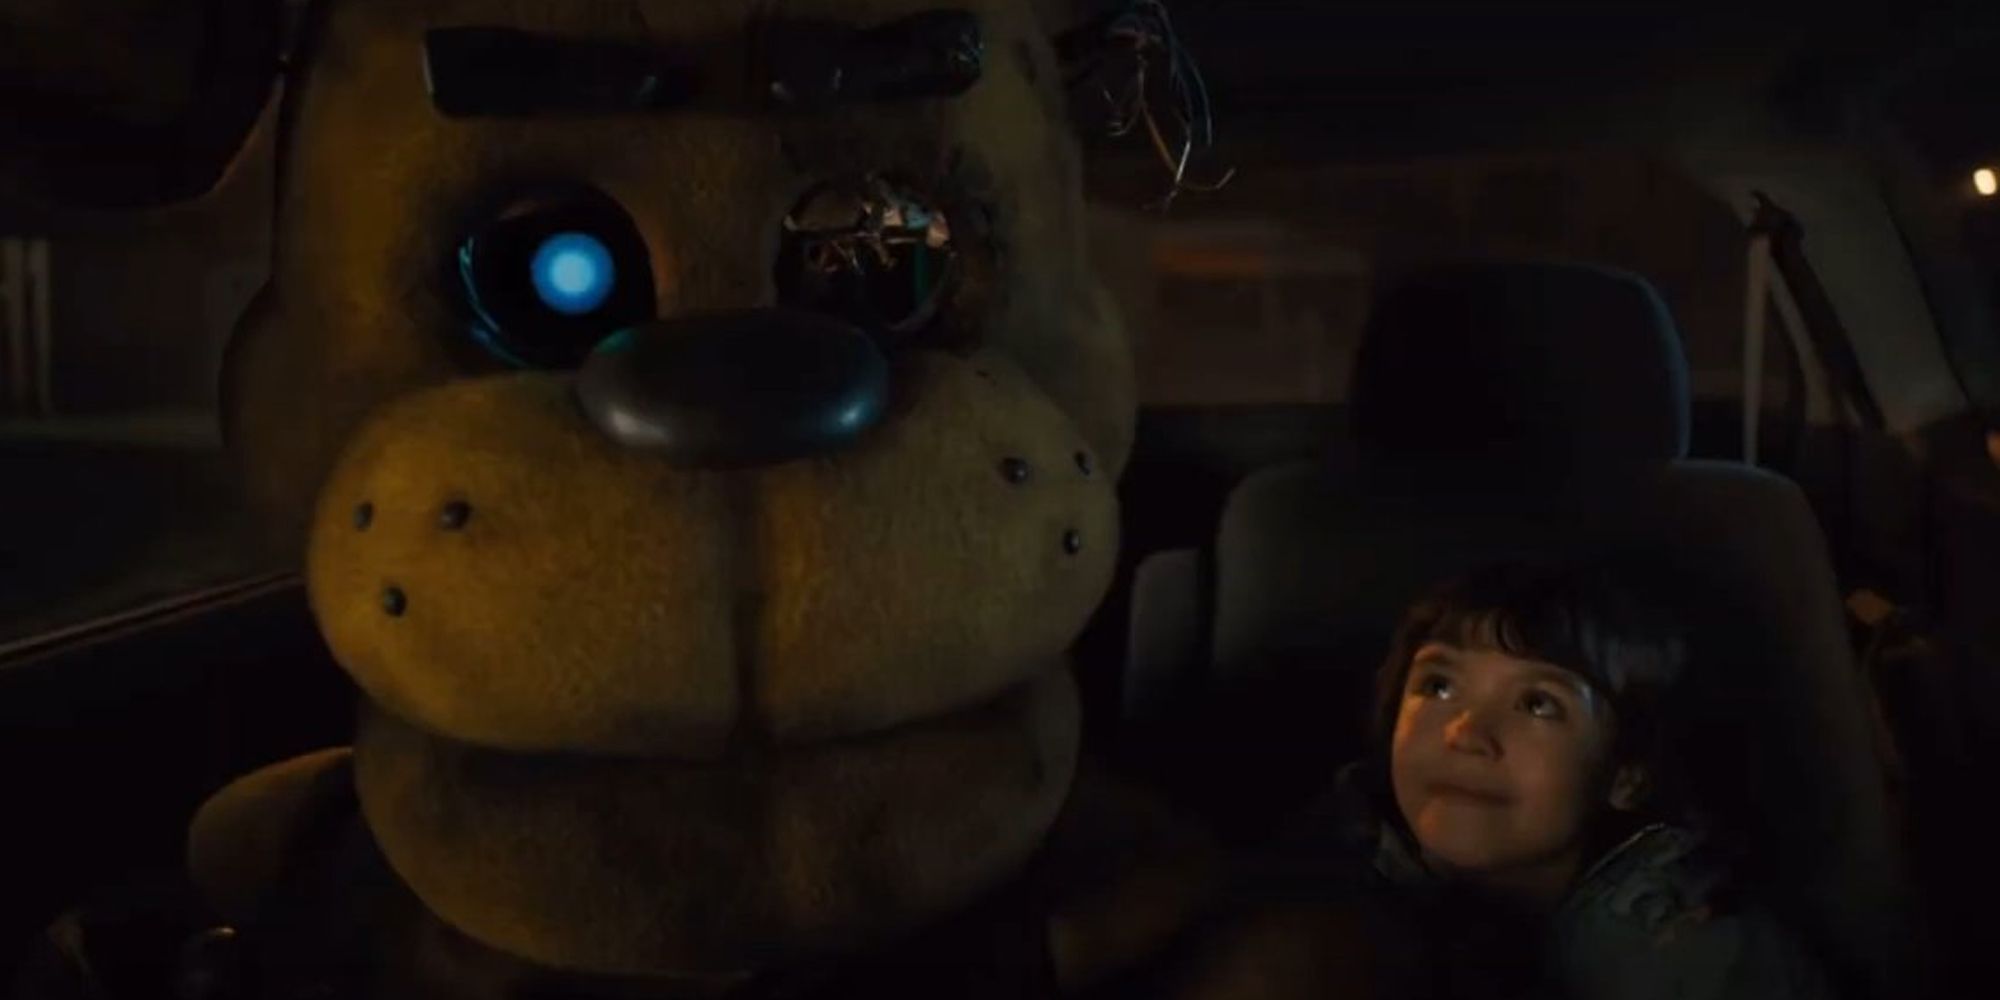 Five Nights at Freddys movie Max sitting in the back of a car with Golden Freddy, who's left eye is missing